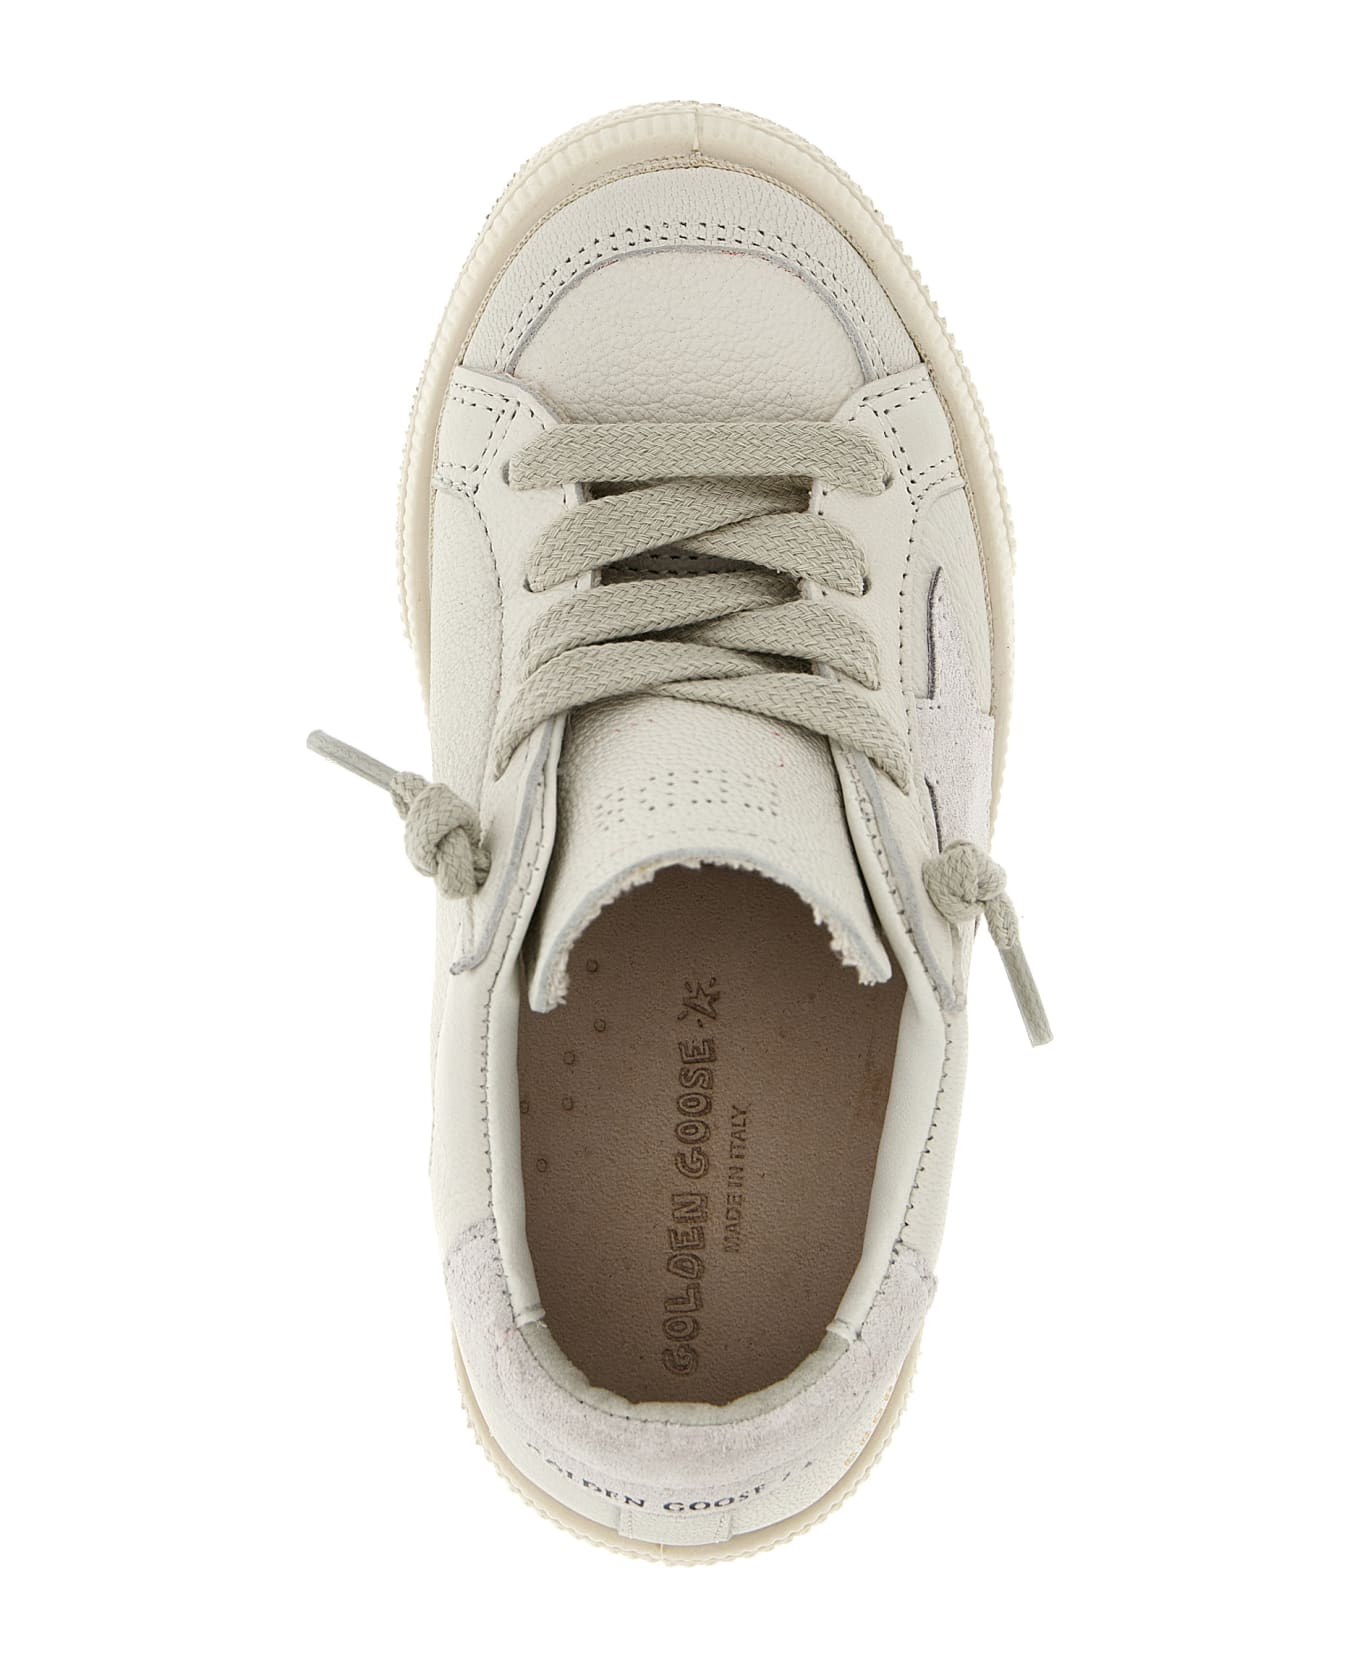 Golden Goose 'may' Sneakers - White